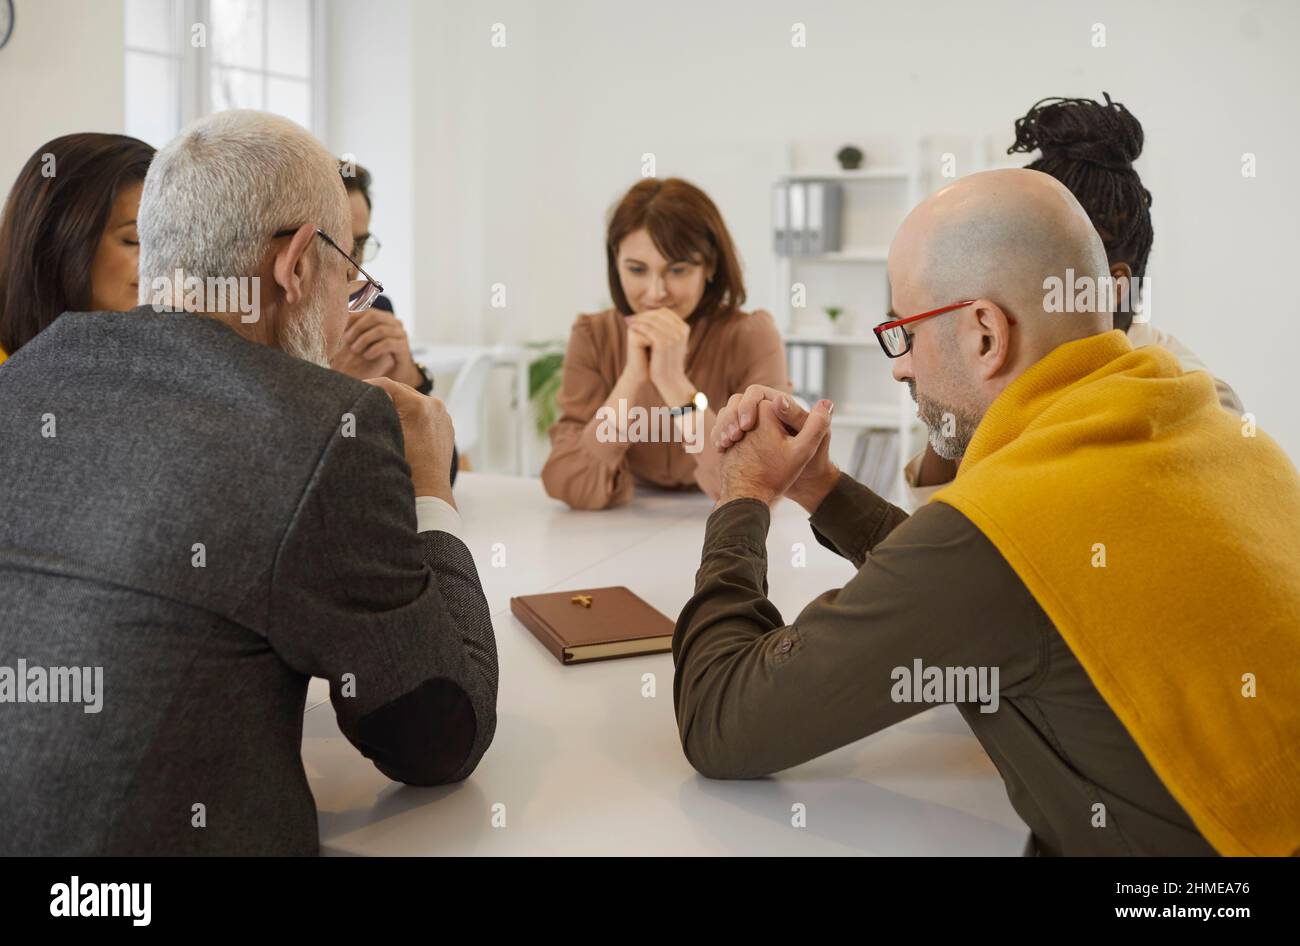 Group of people sitting together around table with Holy Bible and praying to God Stock Photo